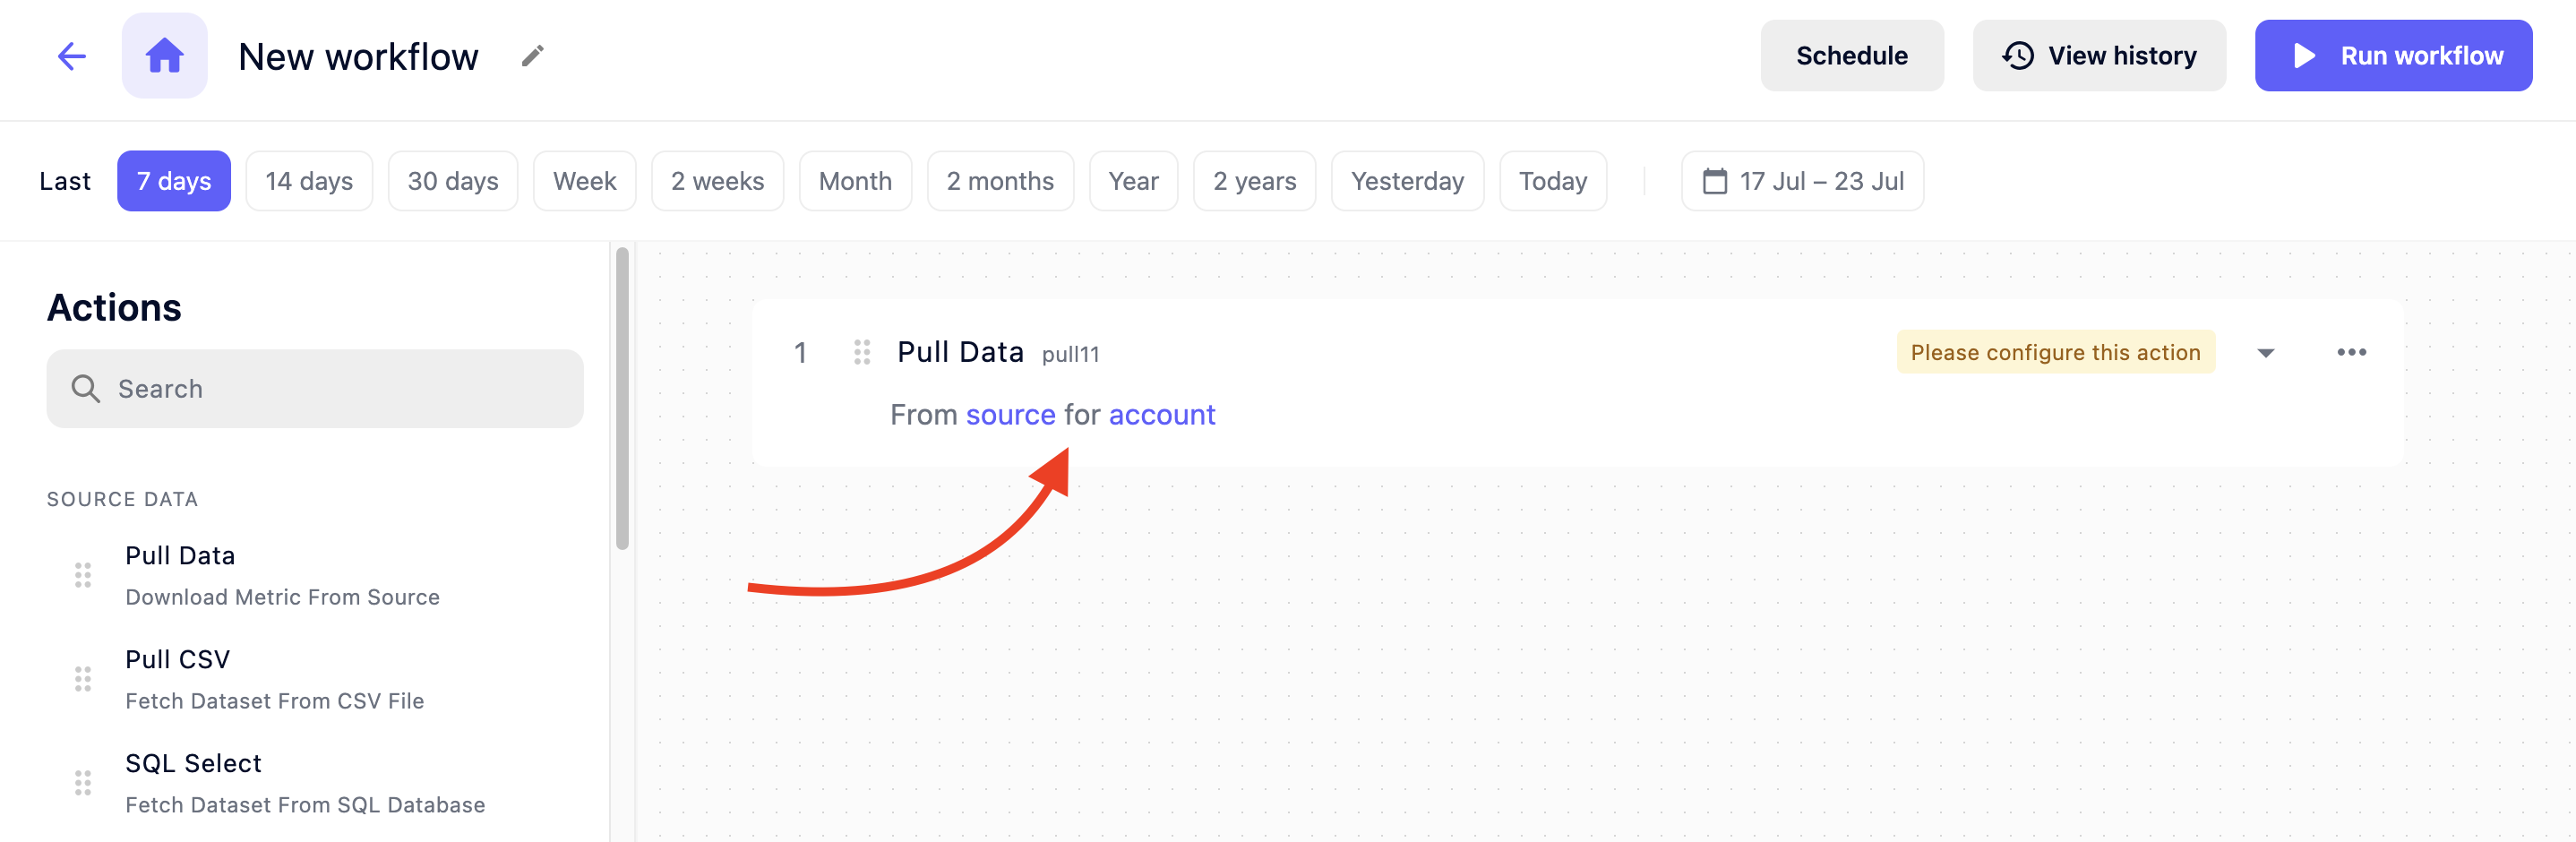 Selecting source and account to complete a workflow in Semrush’s Automated Data Connector. 